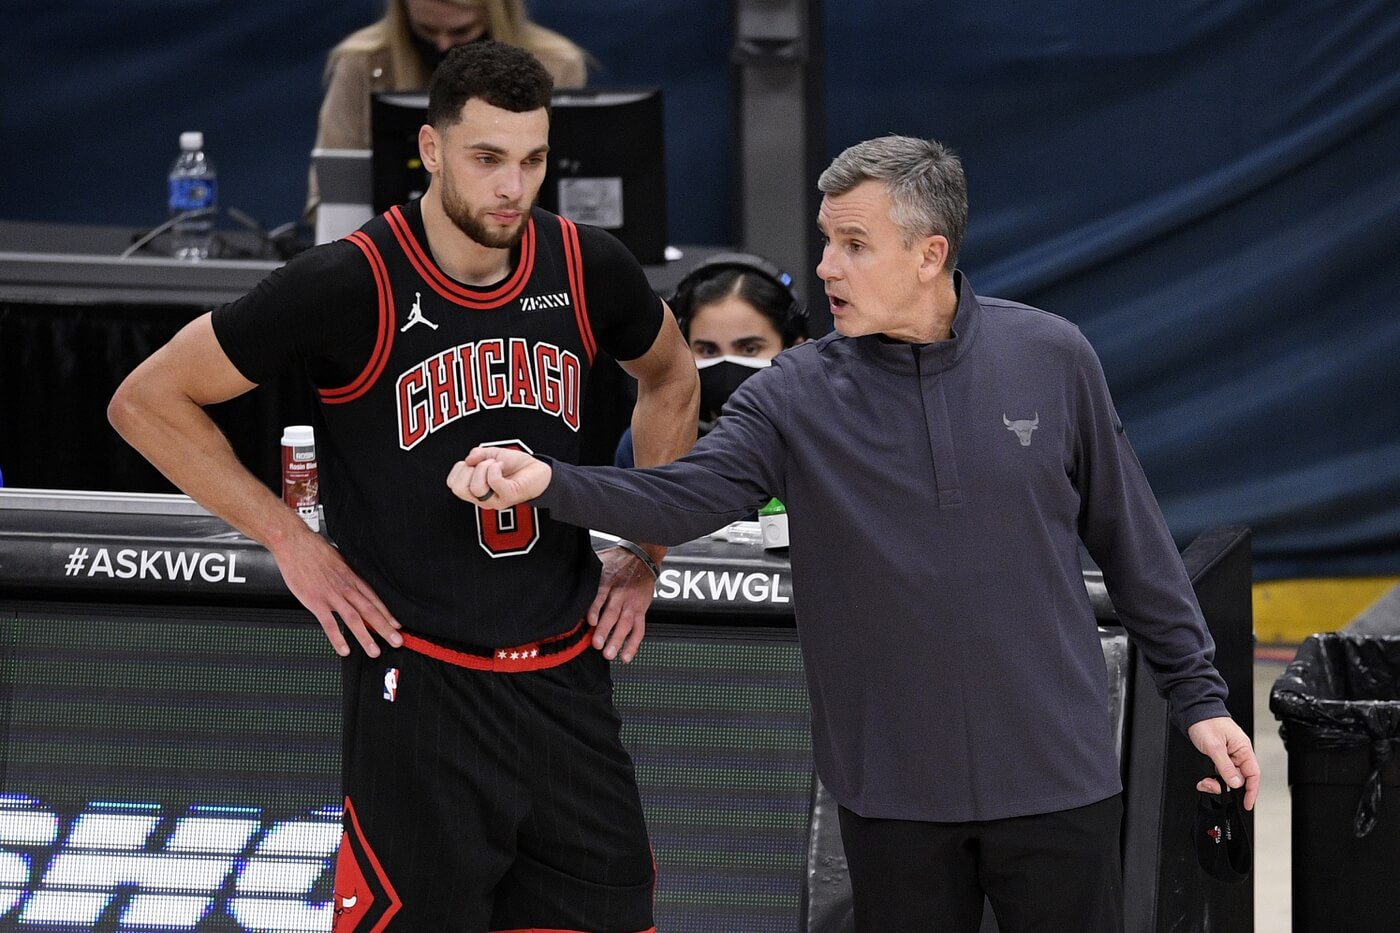 Dec 29, 2020; Washington, District of Columbia, USA; Chicago Bulls head coach Billy Donovan (right) talks with guard Zach LaVine (8) during the second half against the Washington Wizards at Capital One Arena. Mandatory Credit: POOL PHOTOS-USA TODAY Sports